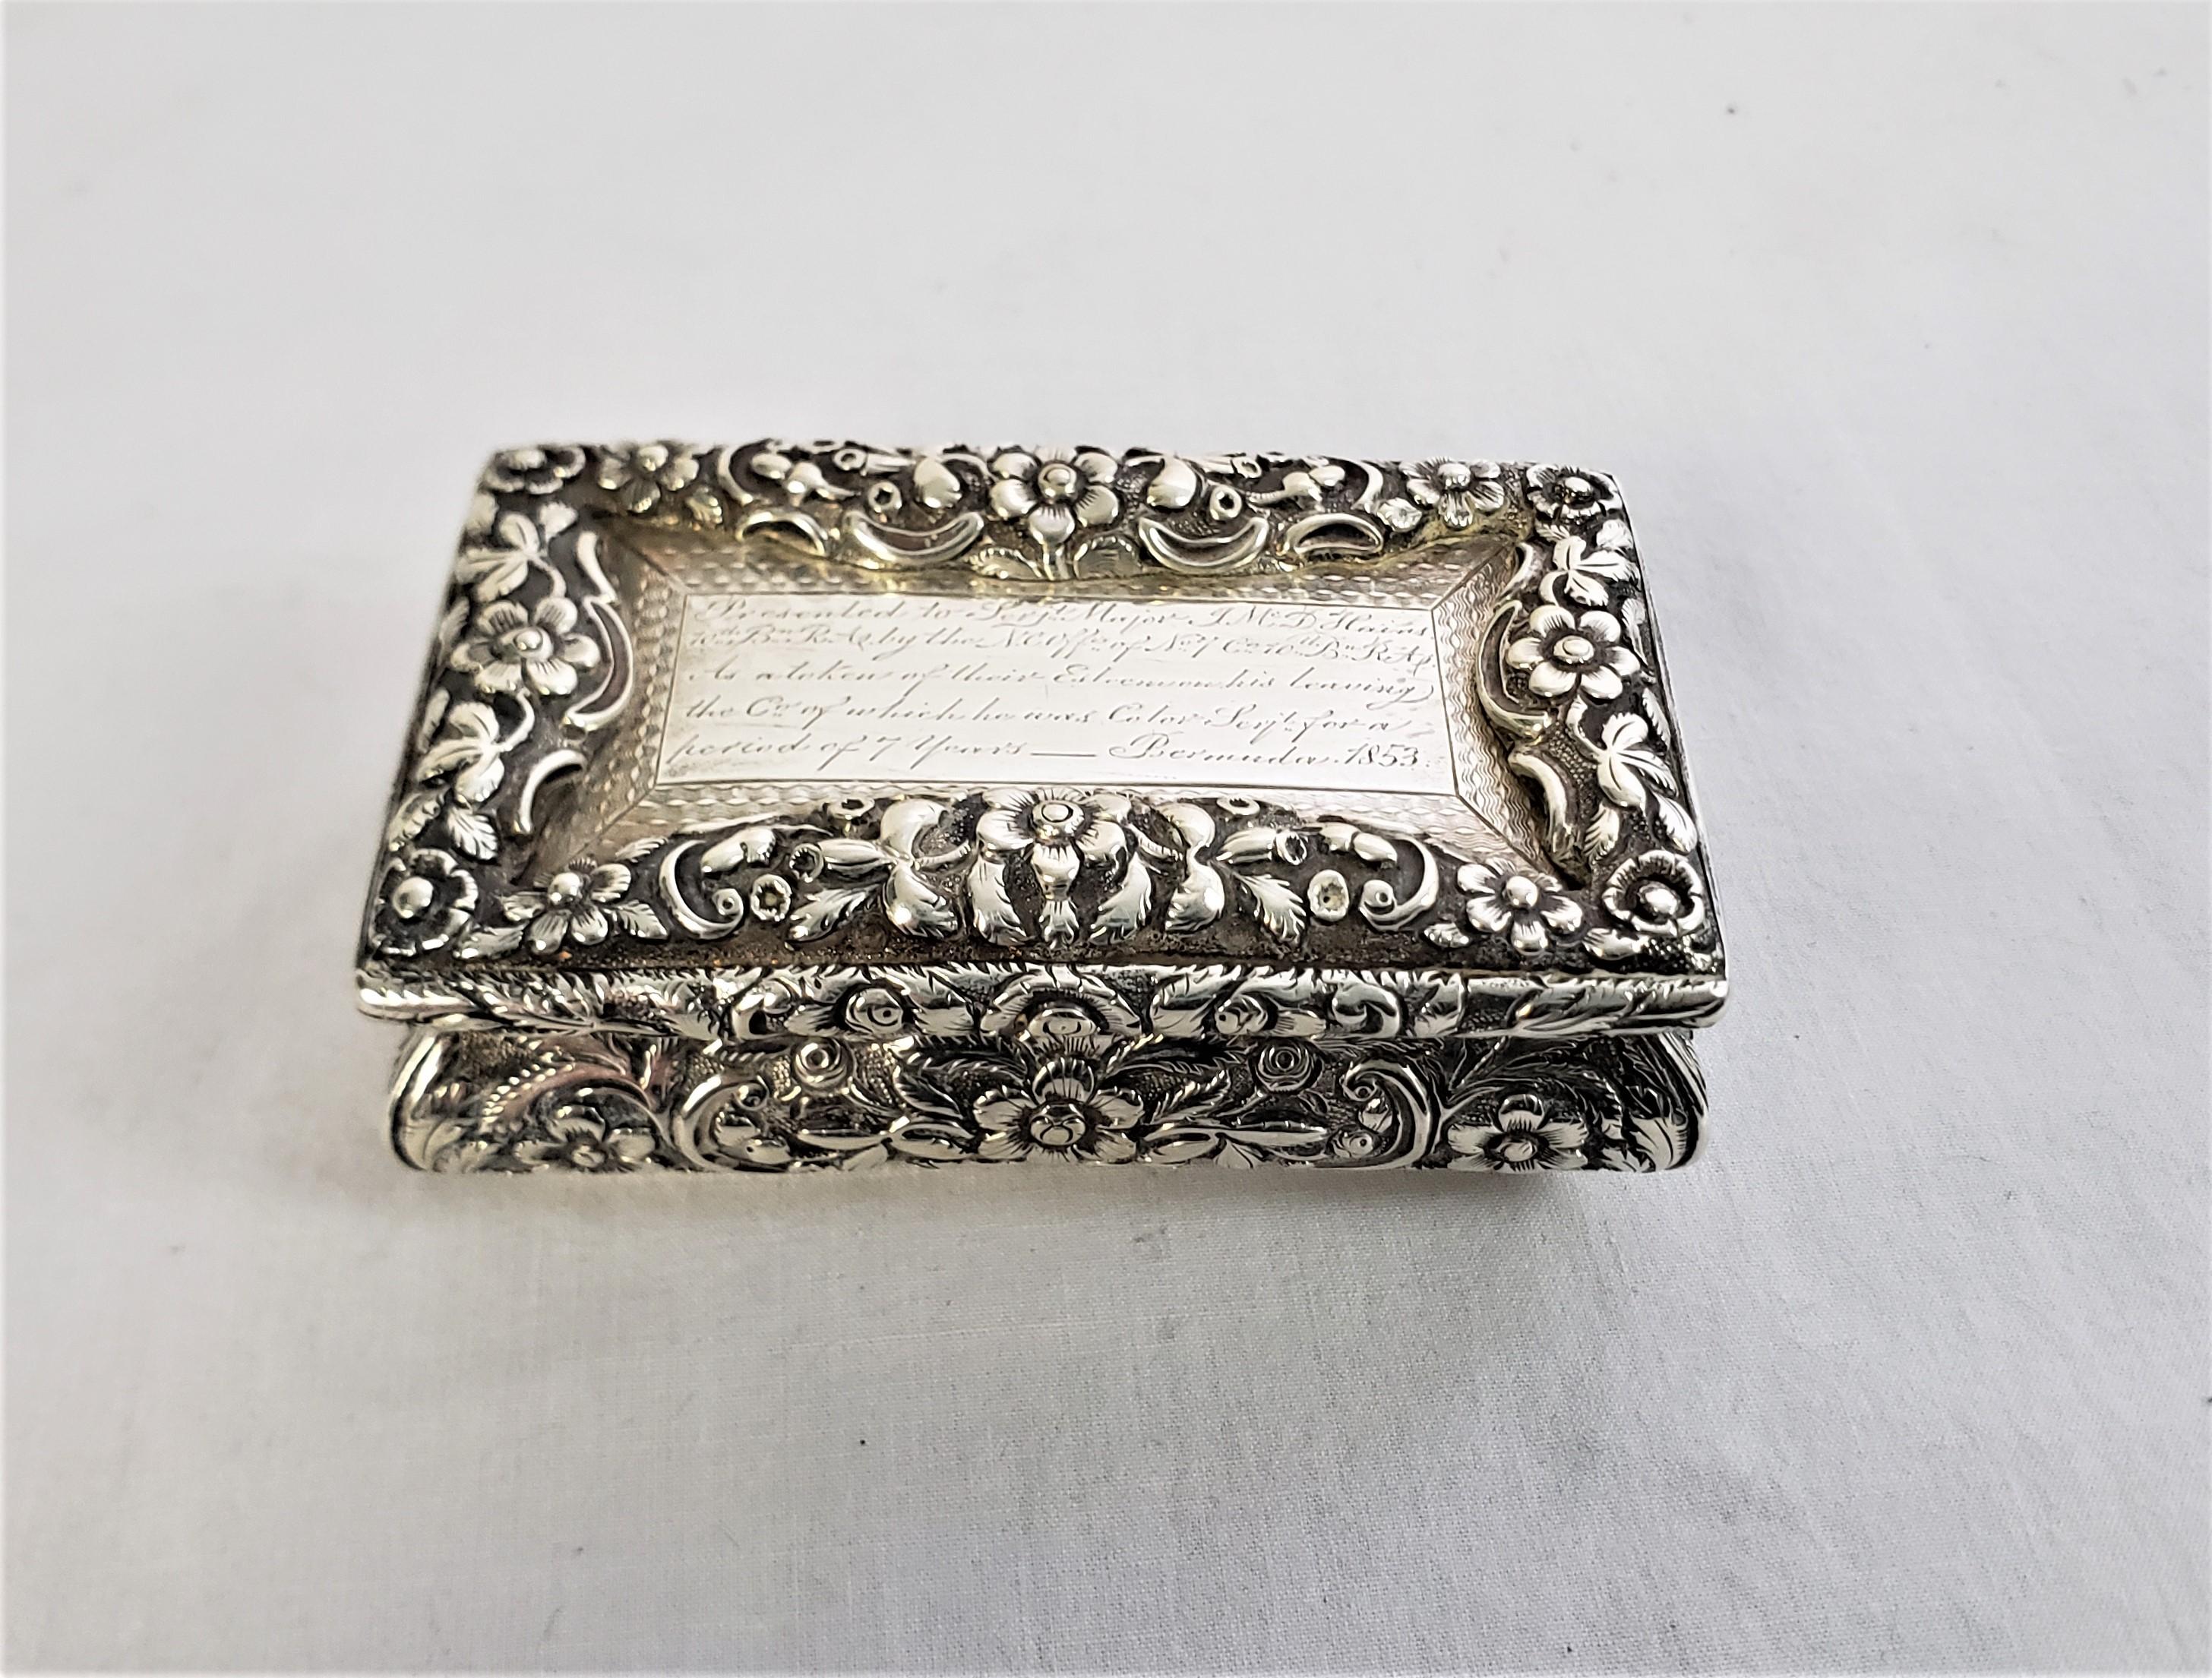 This antique snuff or tobacco box is hallmarked by an unknown maker, and originates from England and dates to 1820 and done in the period Georgian style. The box is engraved in script on the top panel and was presented to Sgt. Major Hains in 1853 in